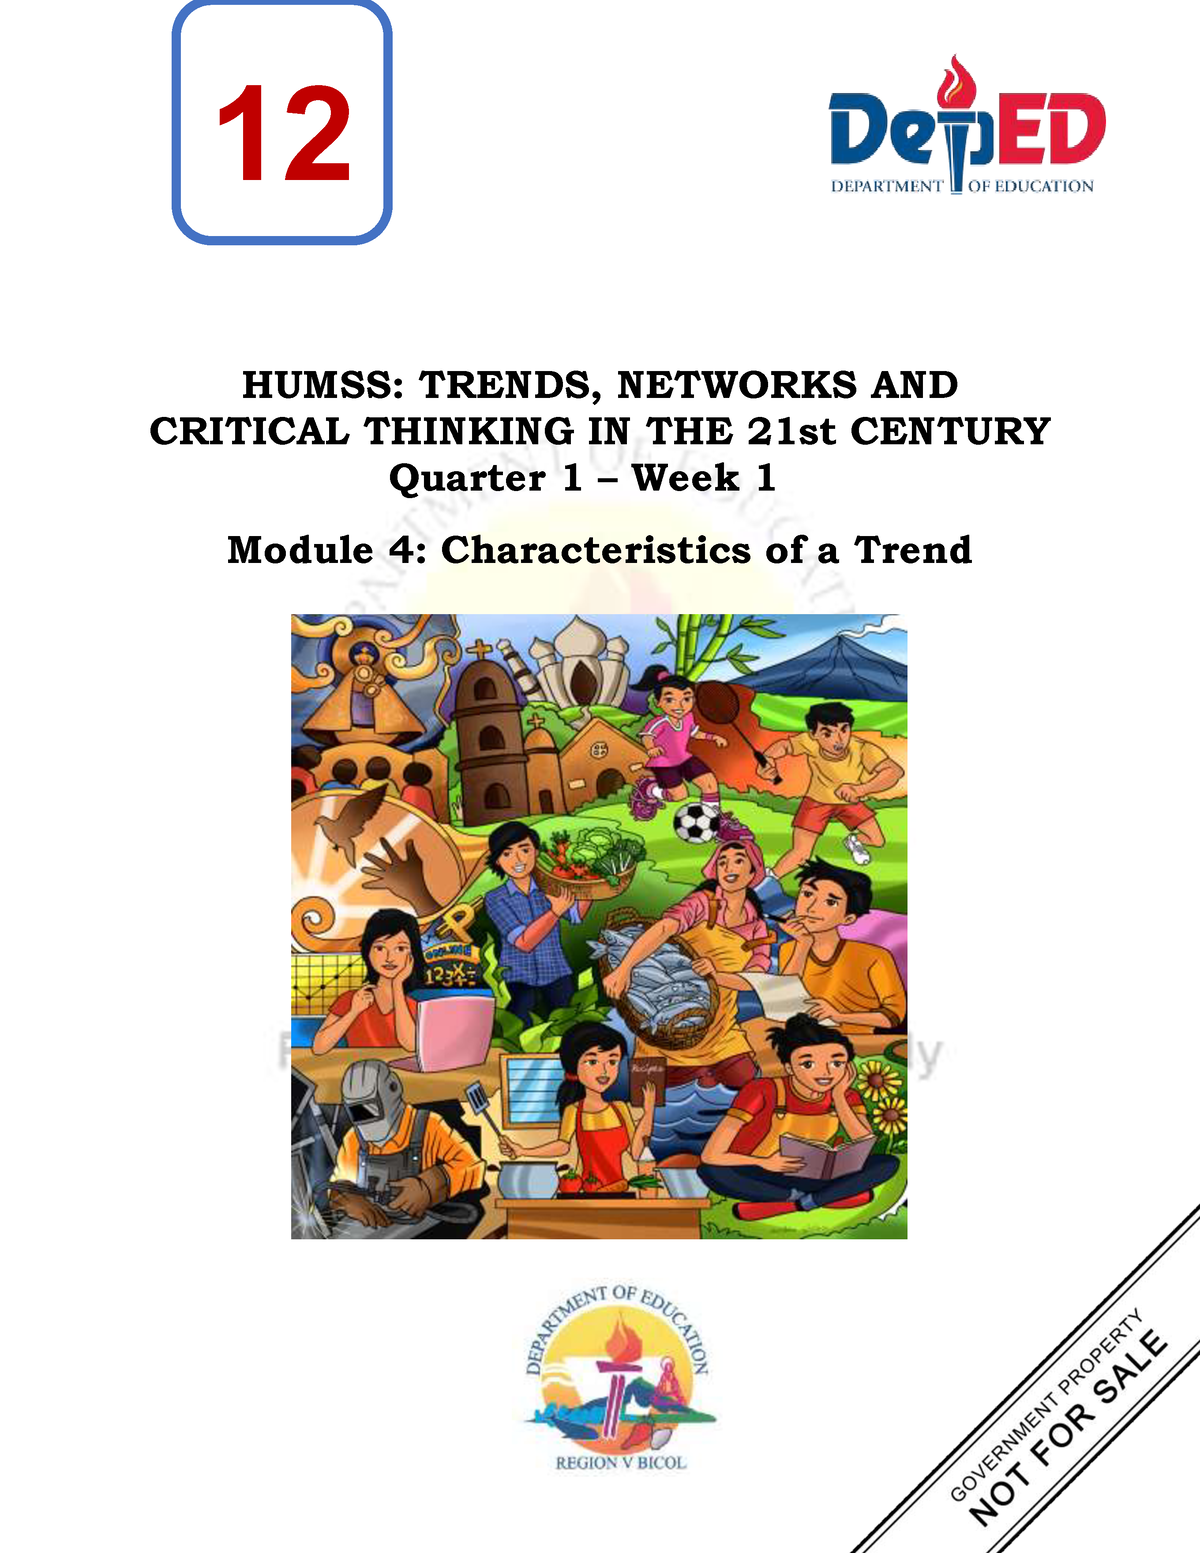 key concepts of trends networks and critical thinking in the 21st century